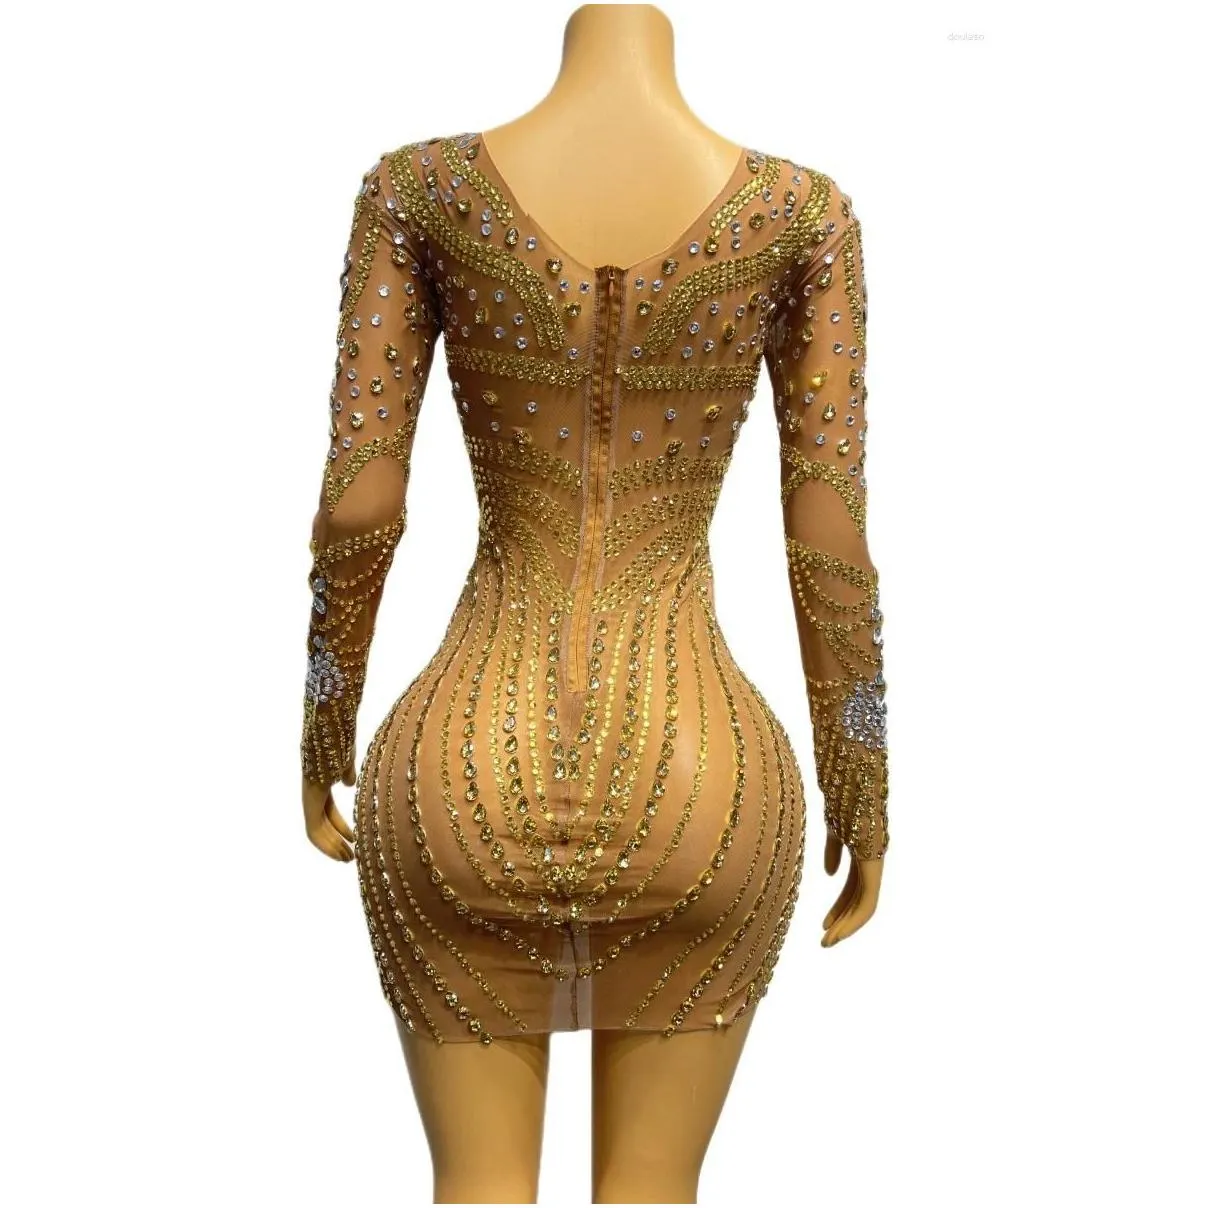 stage wear luxury gold rhinestone mesh stretch sexy tight fitting short dress bar singer performance party celebrate costume